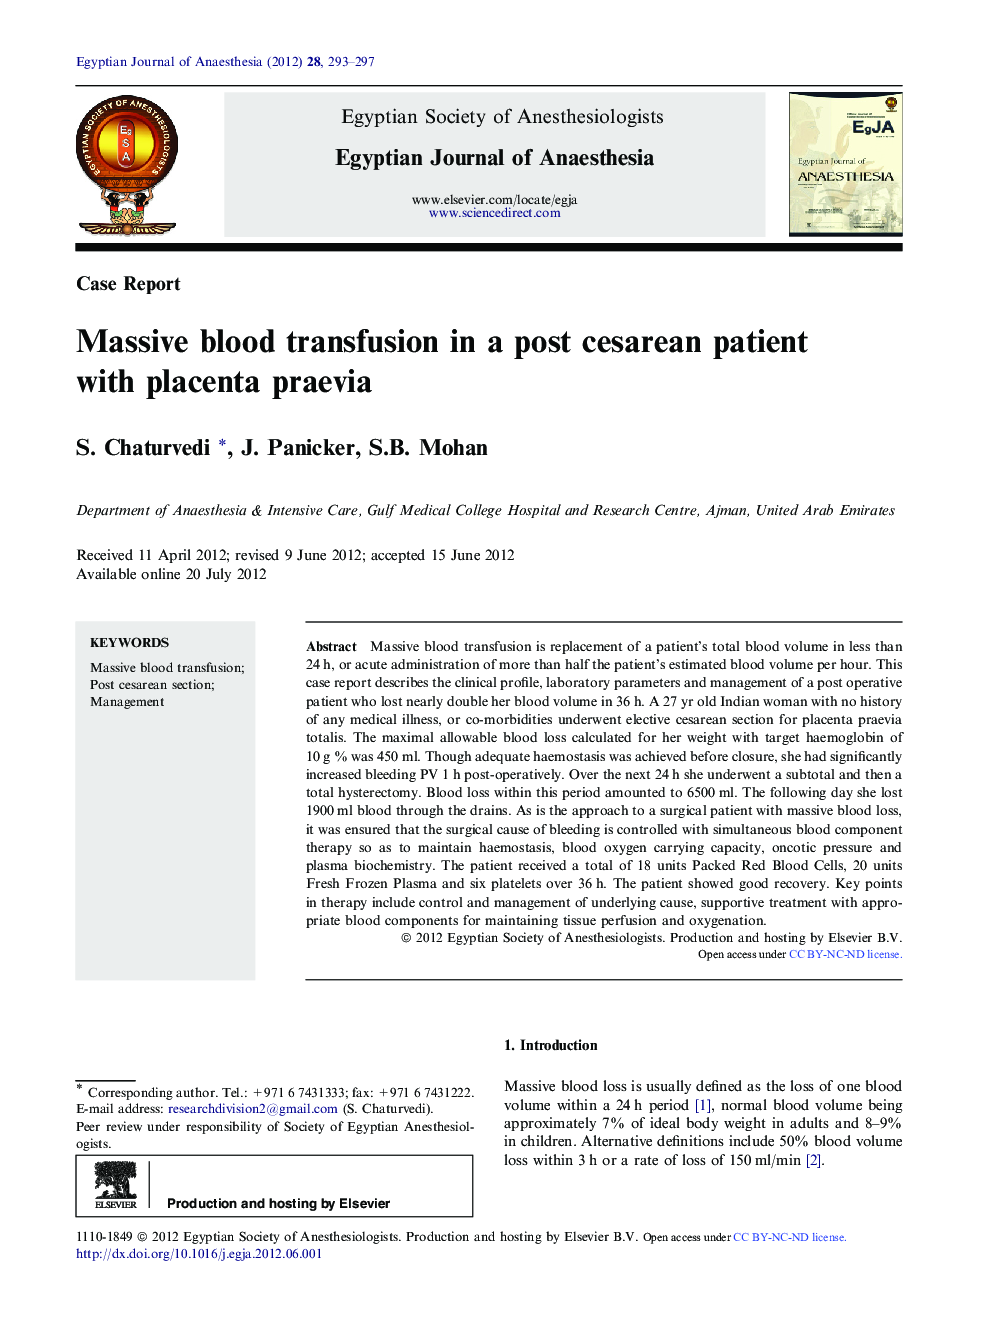 Massive blood transfusion in a post cesarean patient with placenta praevia 